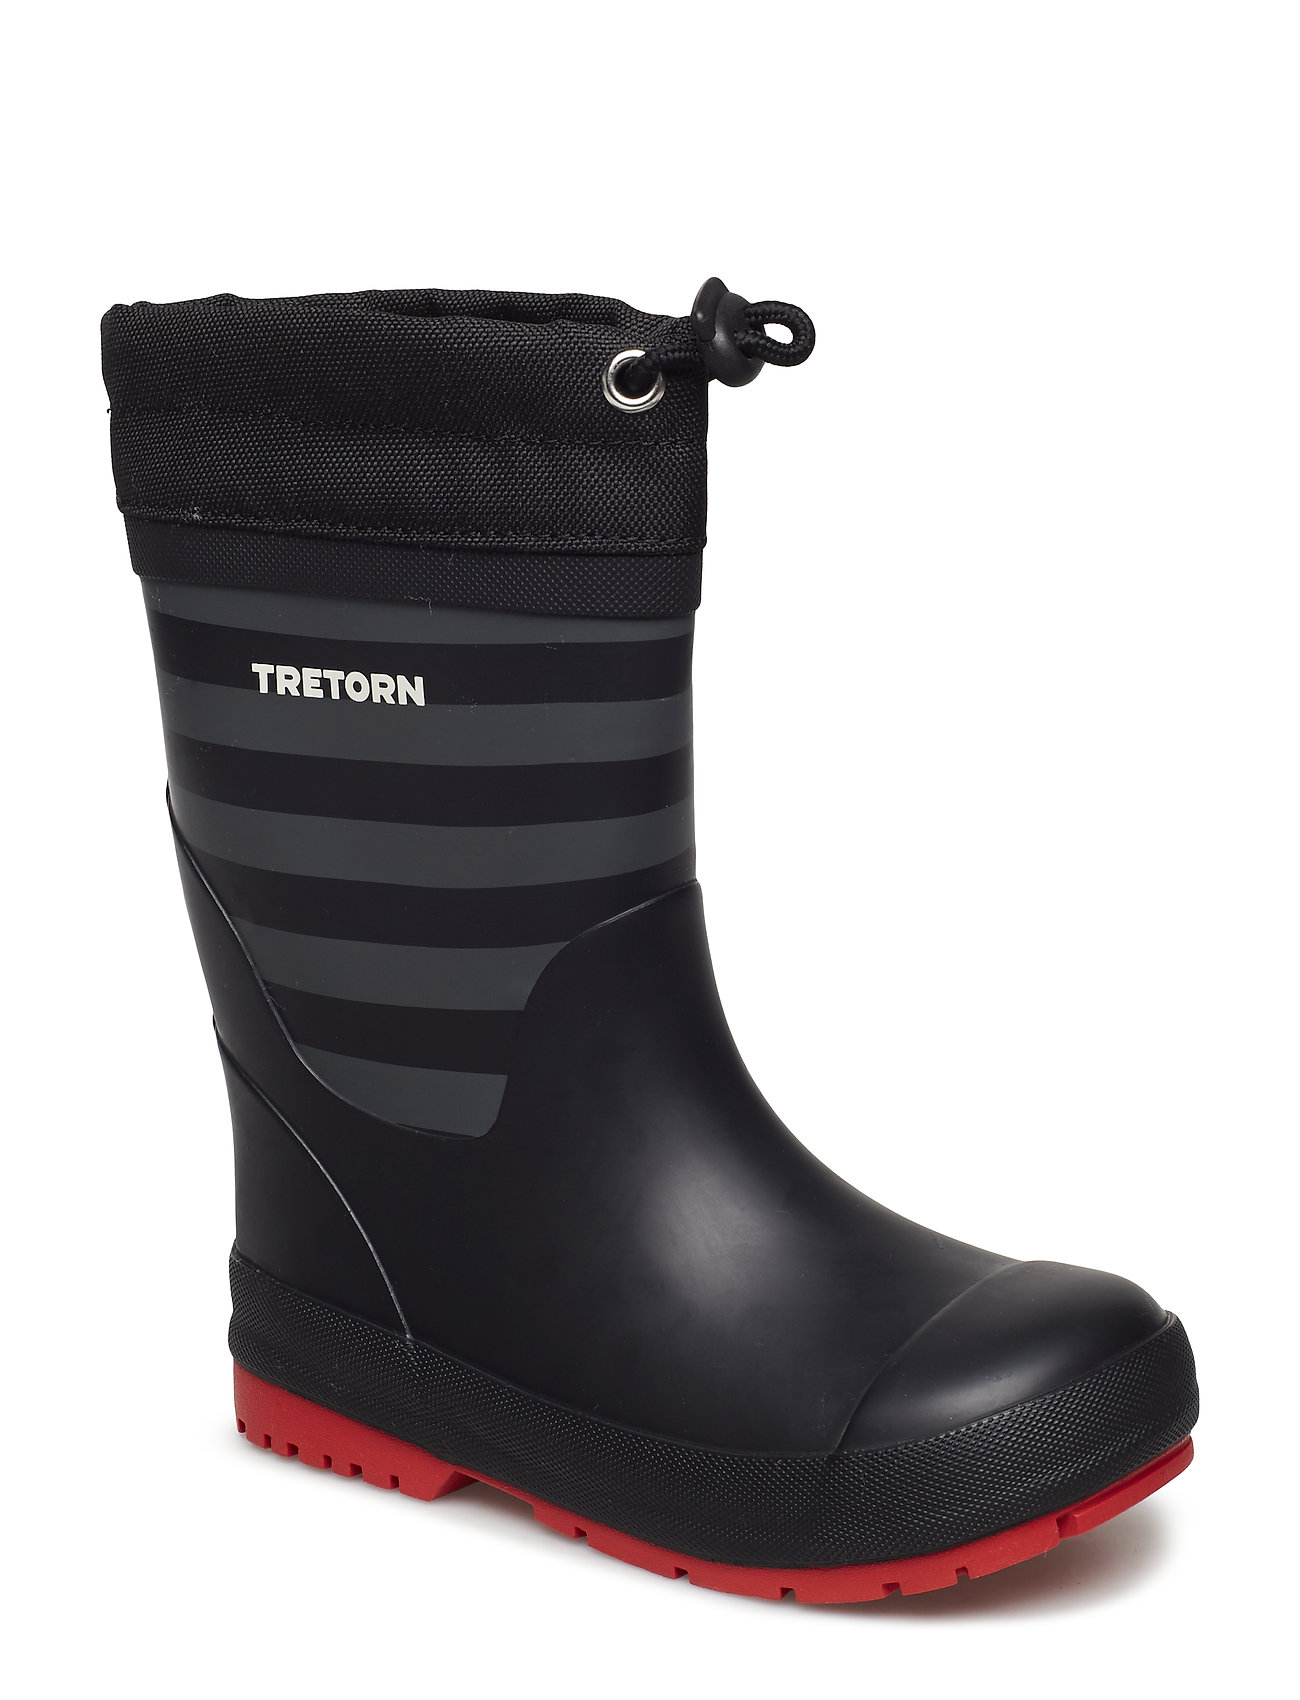 Grnna Vinter Shoes Rubberboots High Rubberboots Lined Rubberboots Svart Tretorn